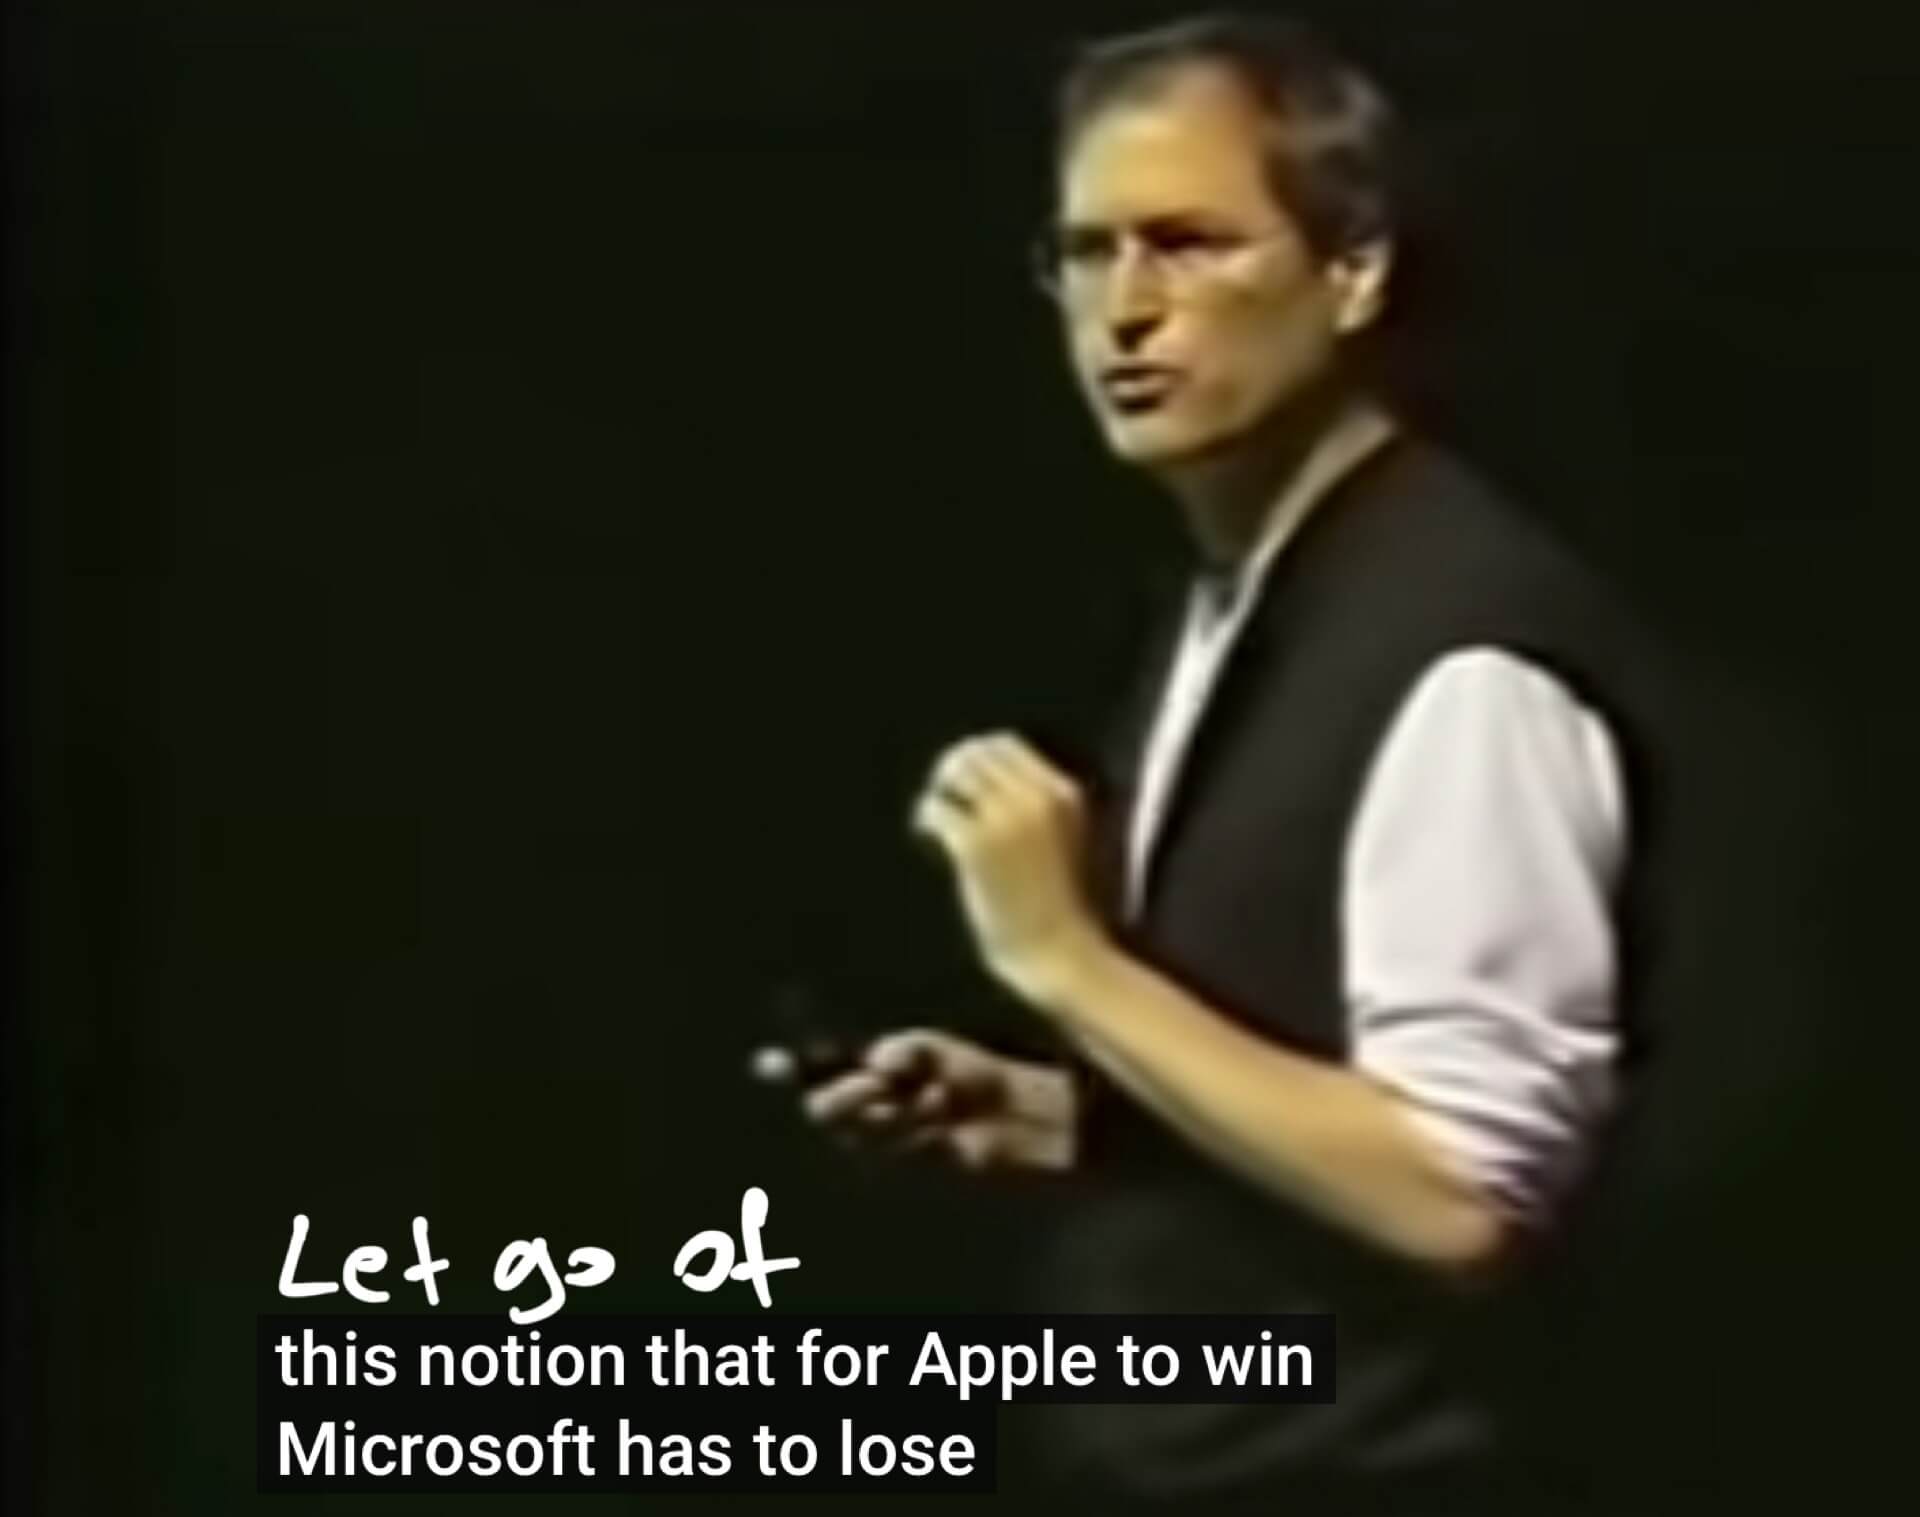 For Developers to win Apple doesn’t have to lose - why Tim Cook should listen to Steve Jobs